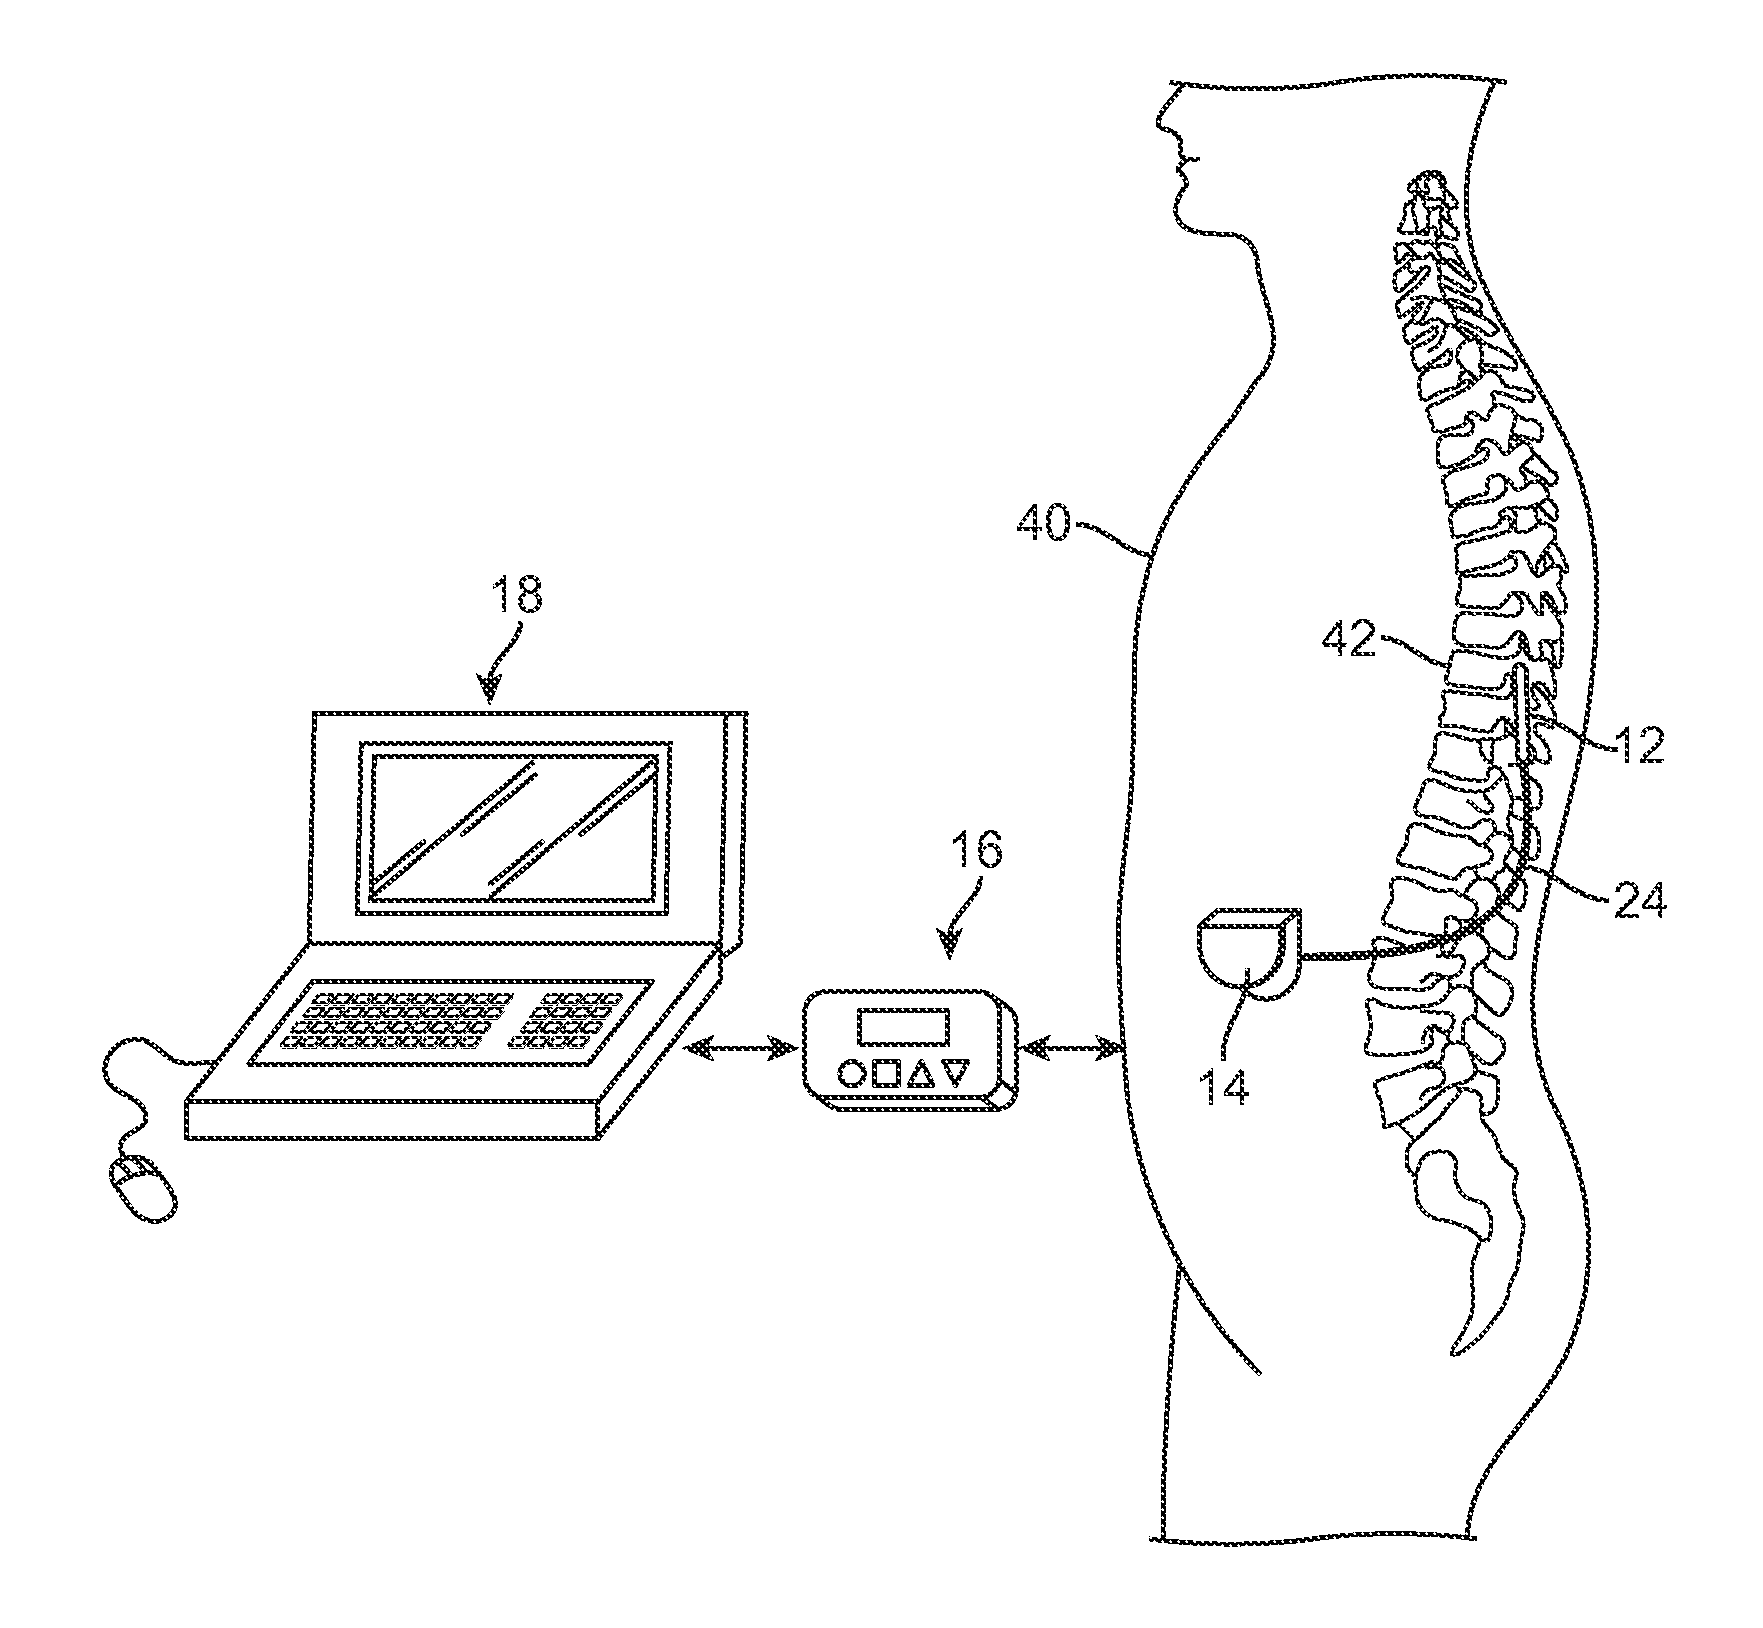 System and method for delivering modulated sub-threshold therapy to a patient